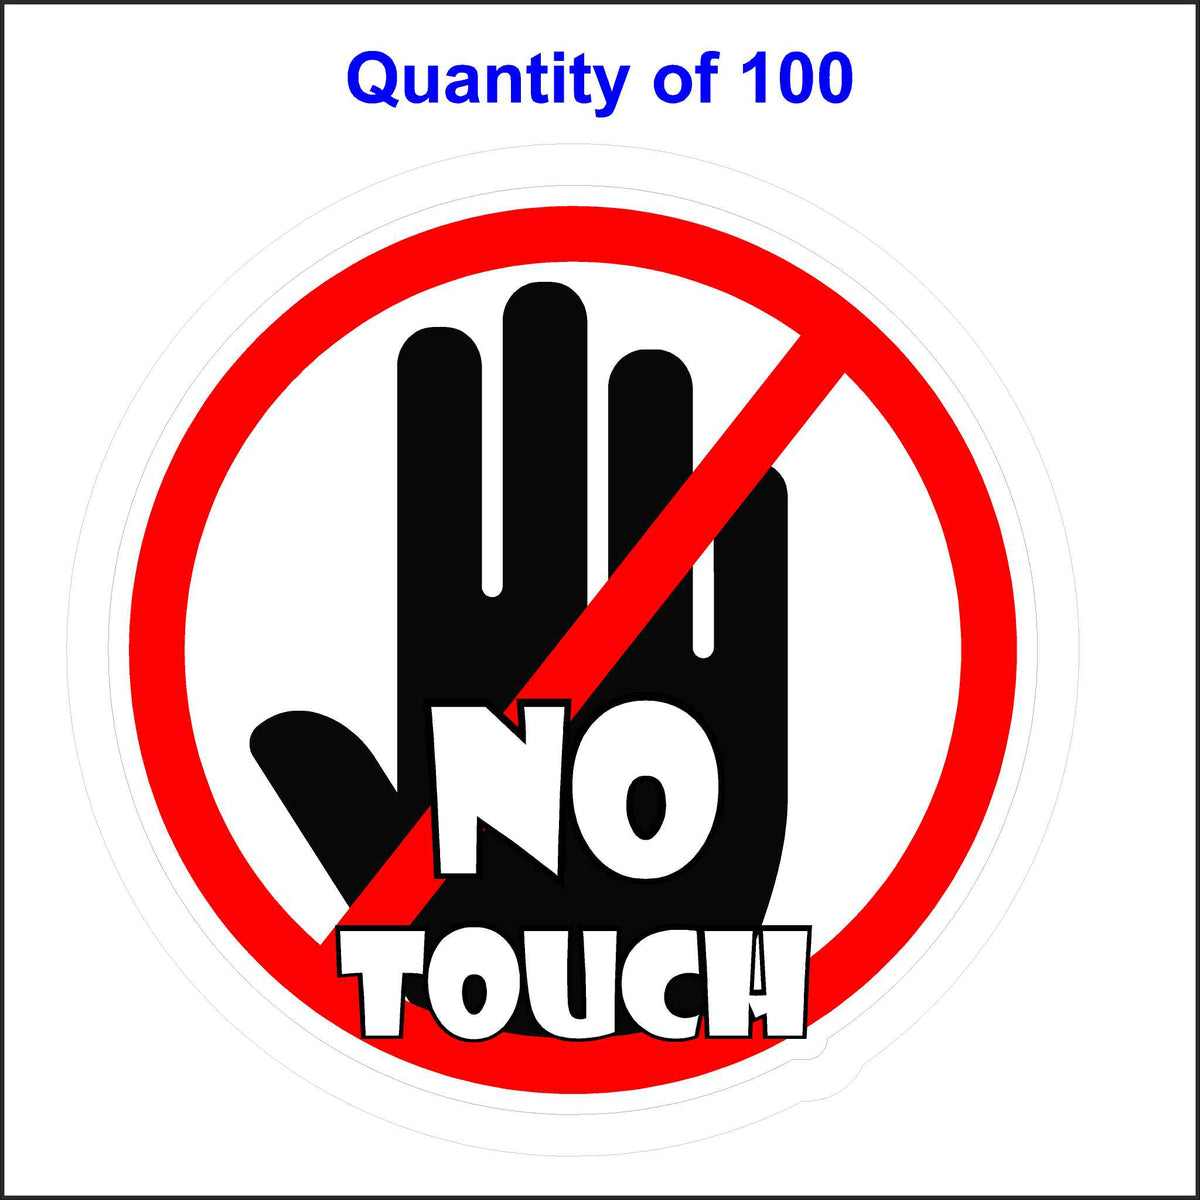 STOP No Touch Sticker. 100 Quantity.